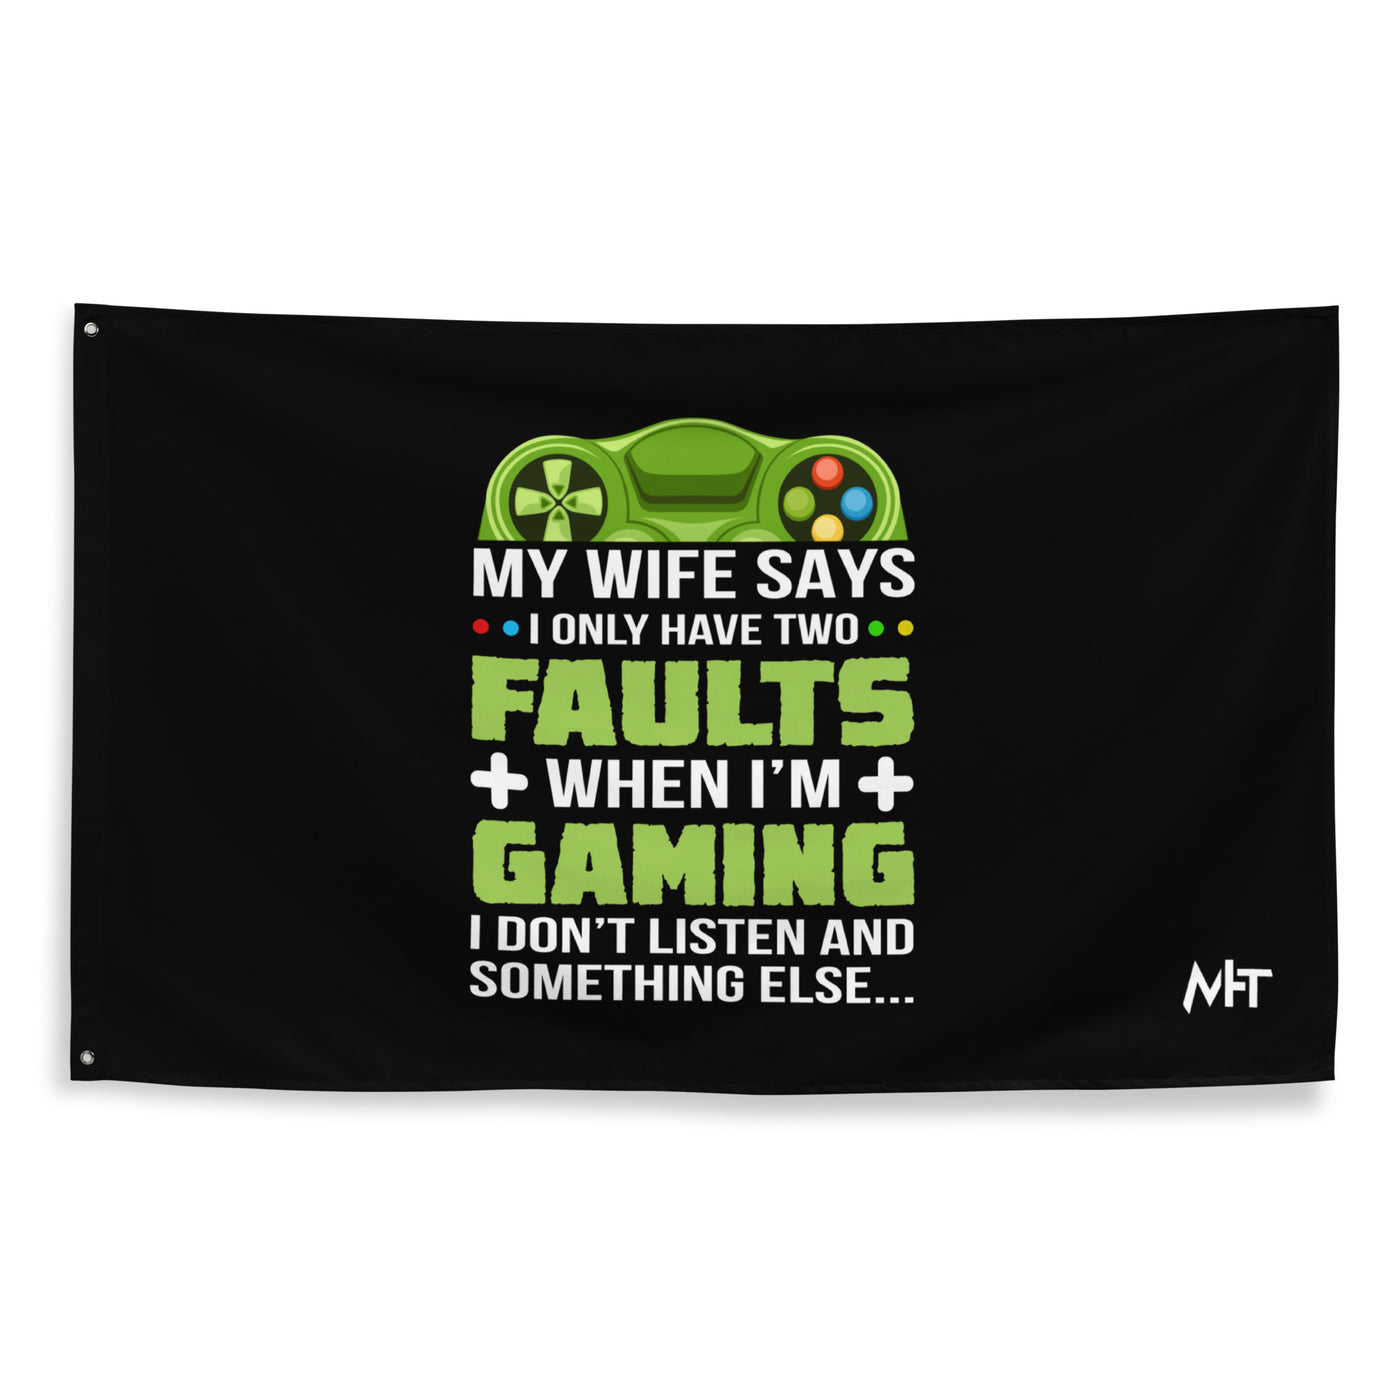 My Wife Says I only Have 2 Faults, while Gaming - Flag